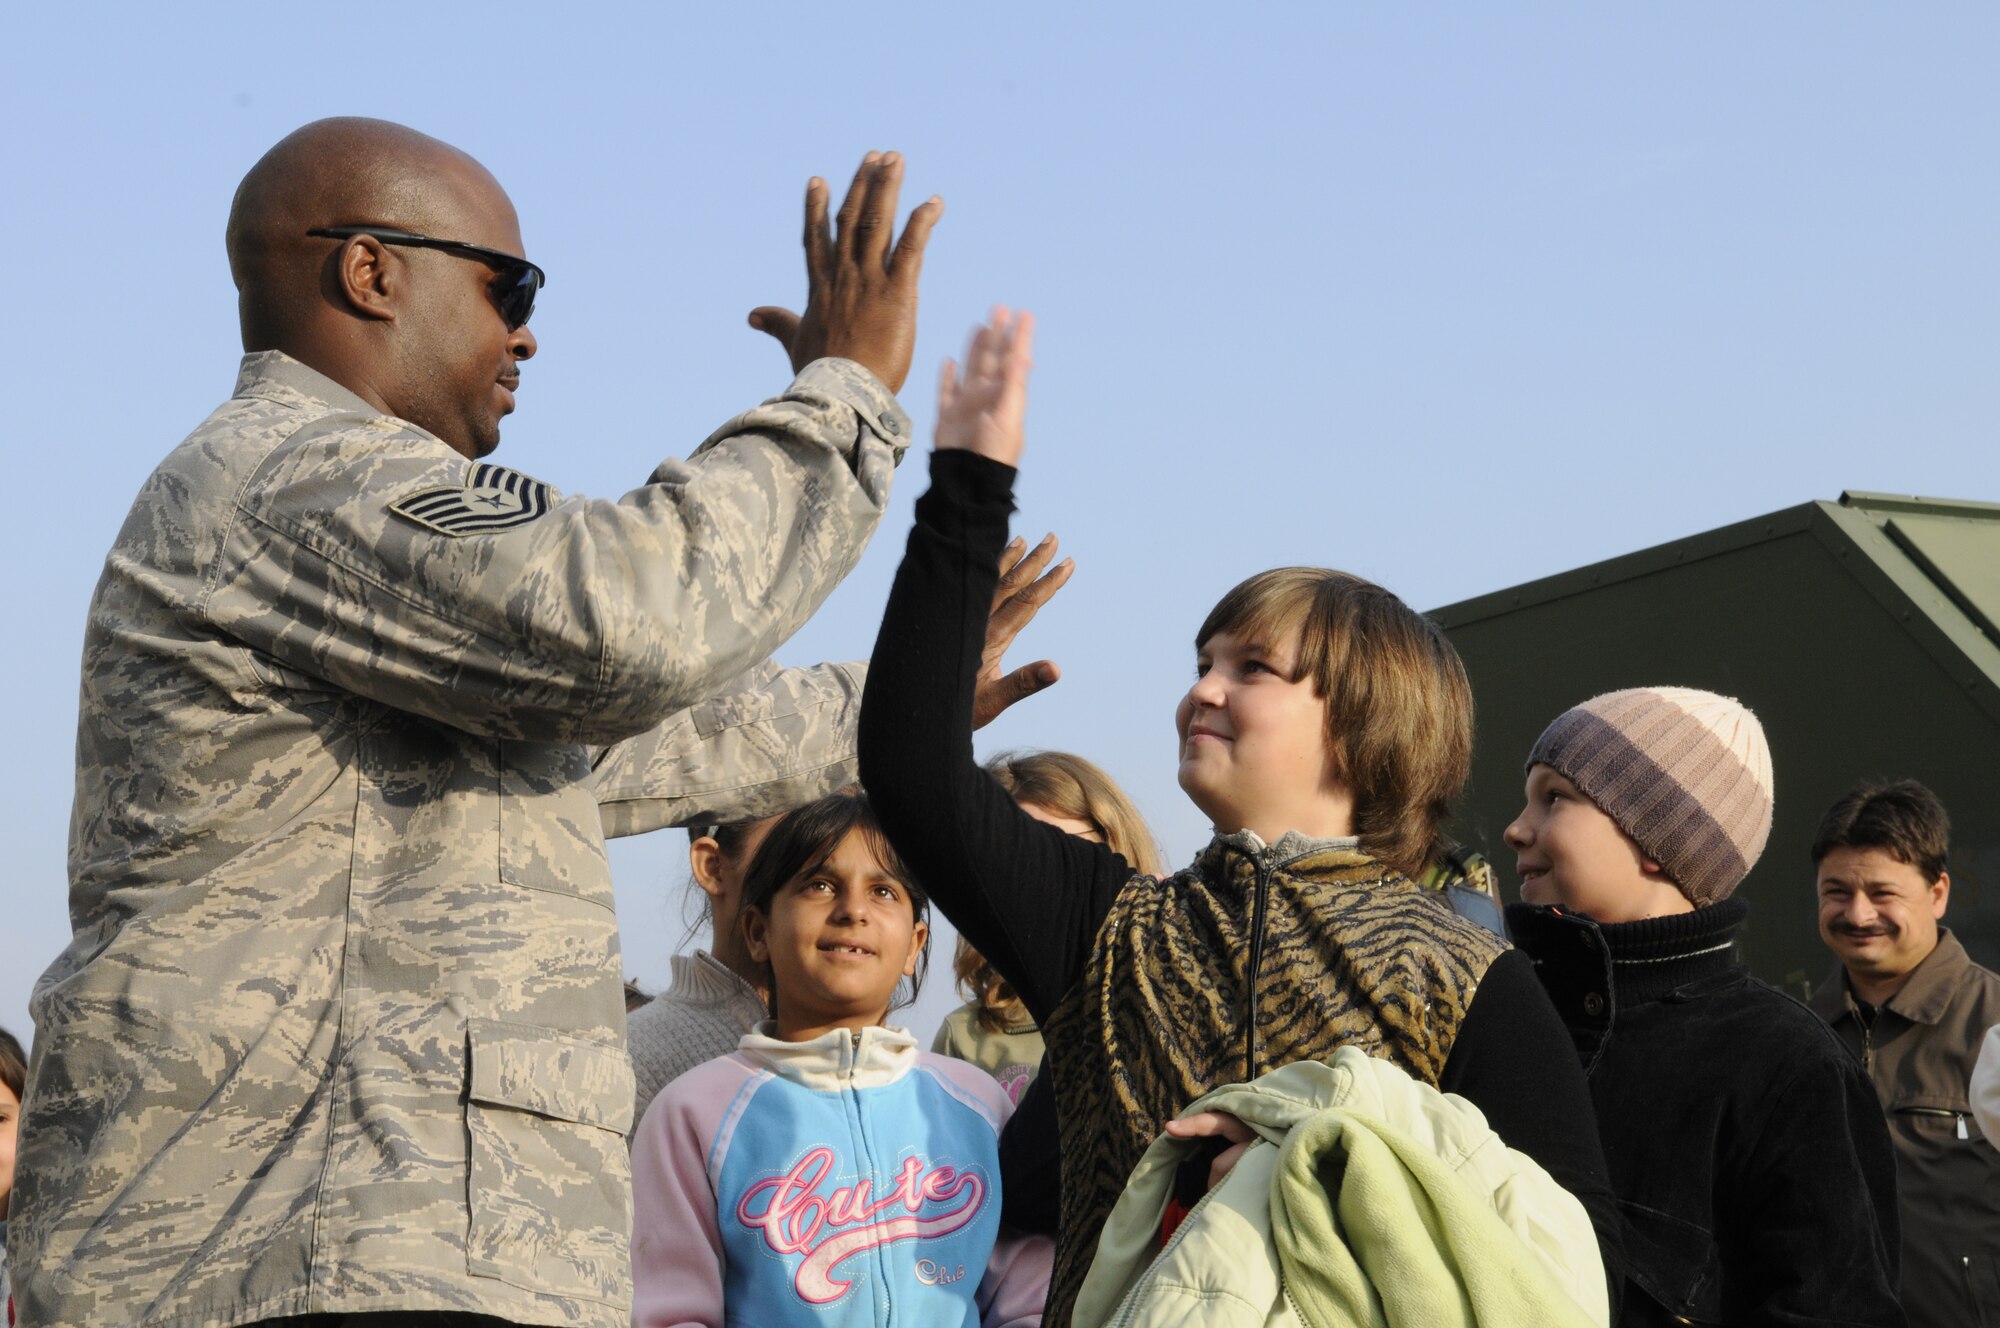 CAMPIA TURZII, Romania – Tech. Sgt. Dexter High, 81st Aircraft Maintenance Unit, high-fives Romanian school children during their visit to the 71st Air Base Wing Oct. 26. Members of Spangdalem Air Base deployed in support of Operation Dacian Thunder 2009 showed the children a static display of an A-10 Thunderbolt II and let them operate the hose of a fire truck during their visit. The deployed units also donated money and time to help renovate a community center dedicated to helping local children with their academic studies. (U.S. Air Force photo/Senior Airman Benjamin Wilson)